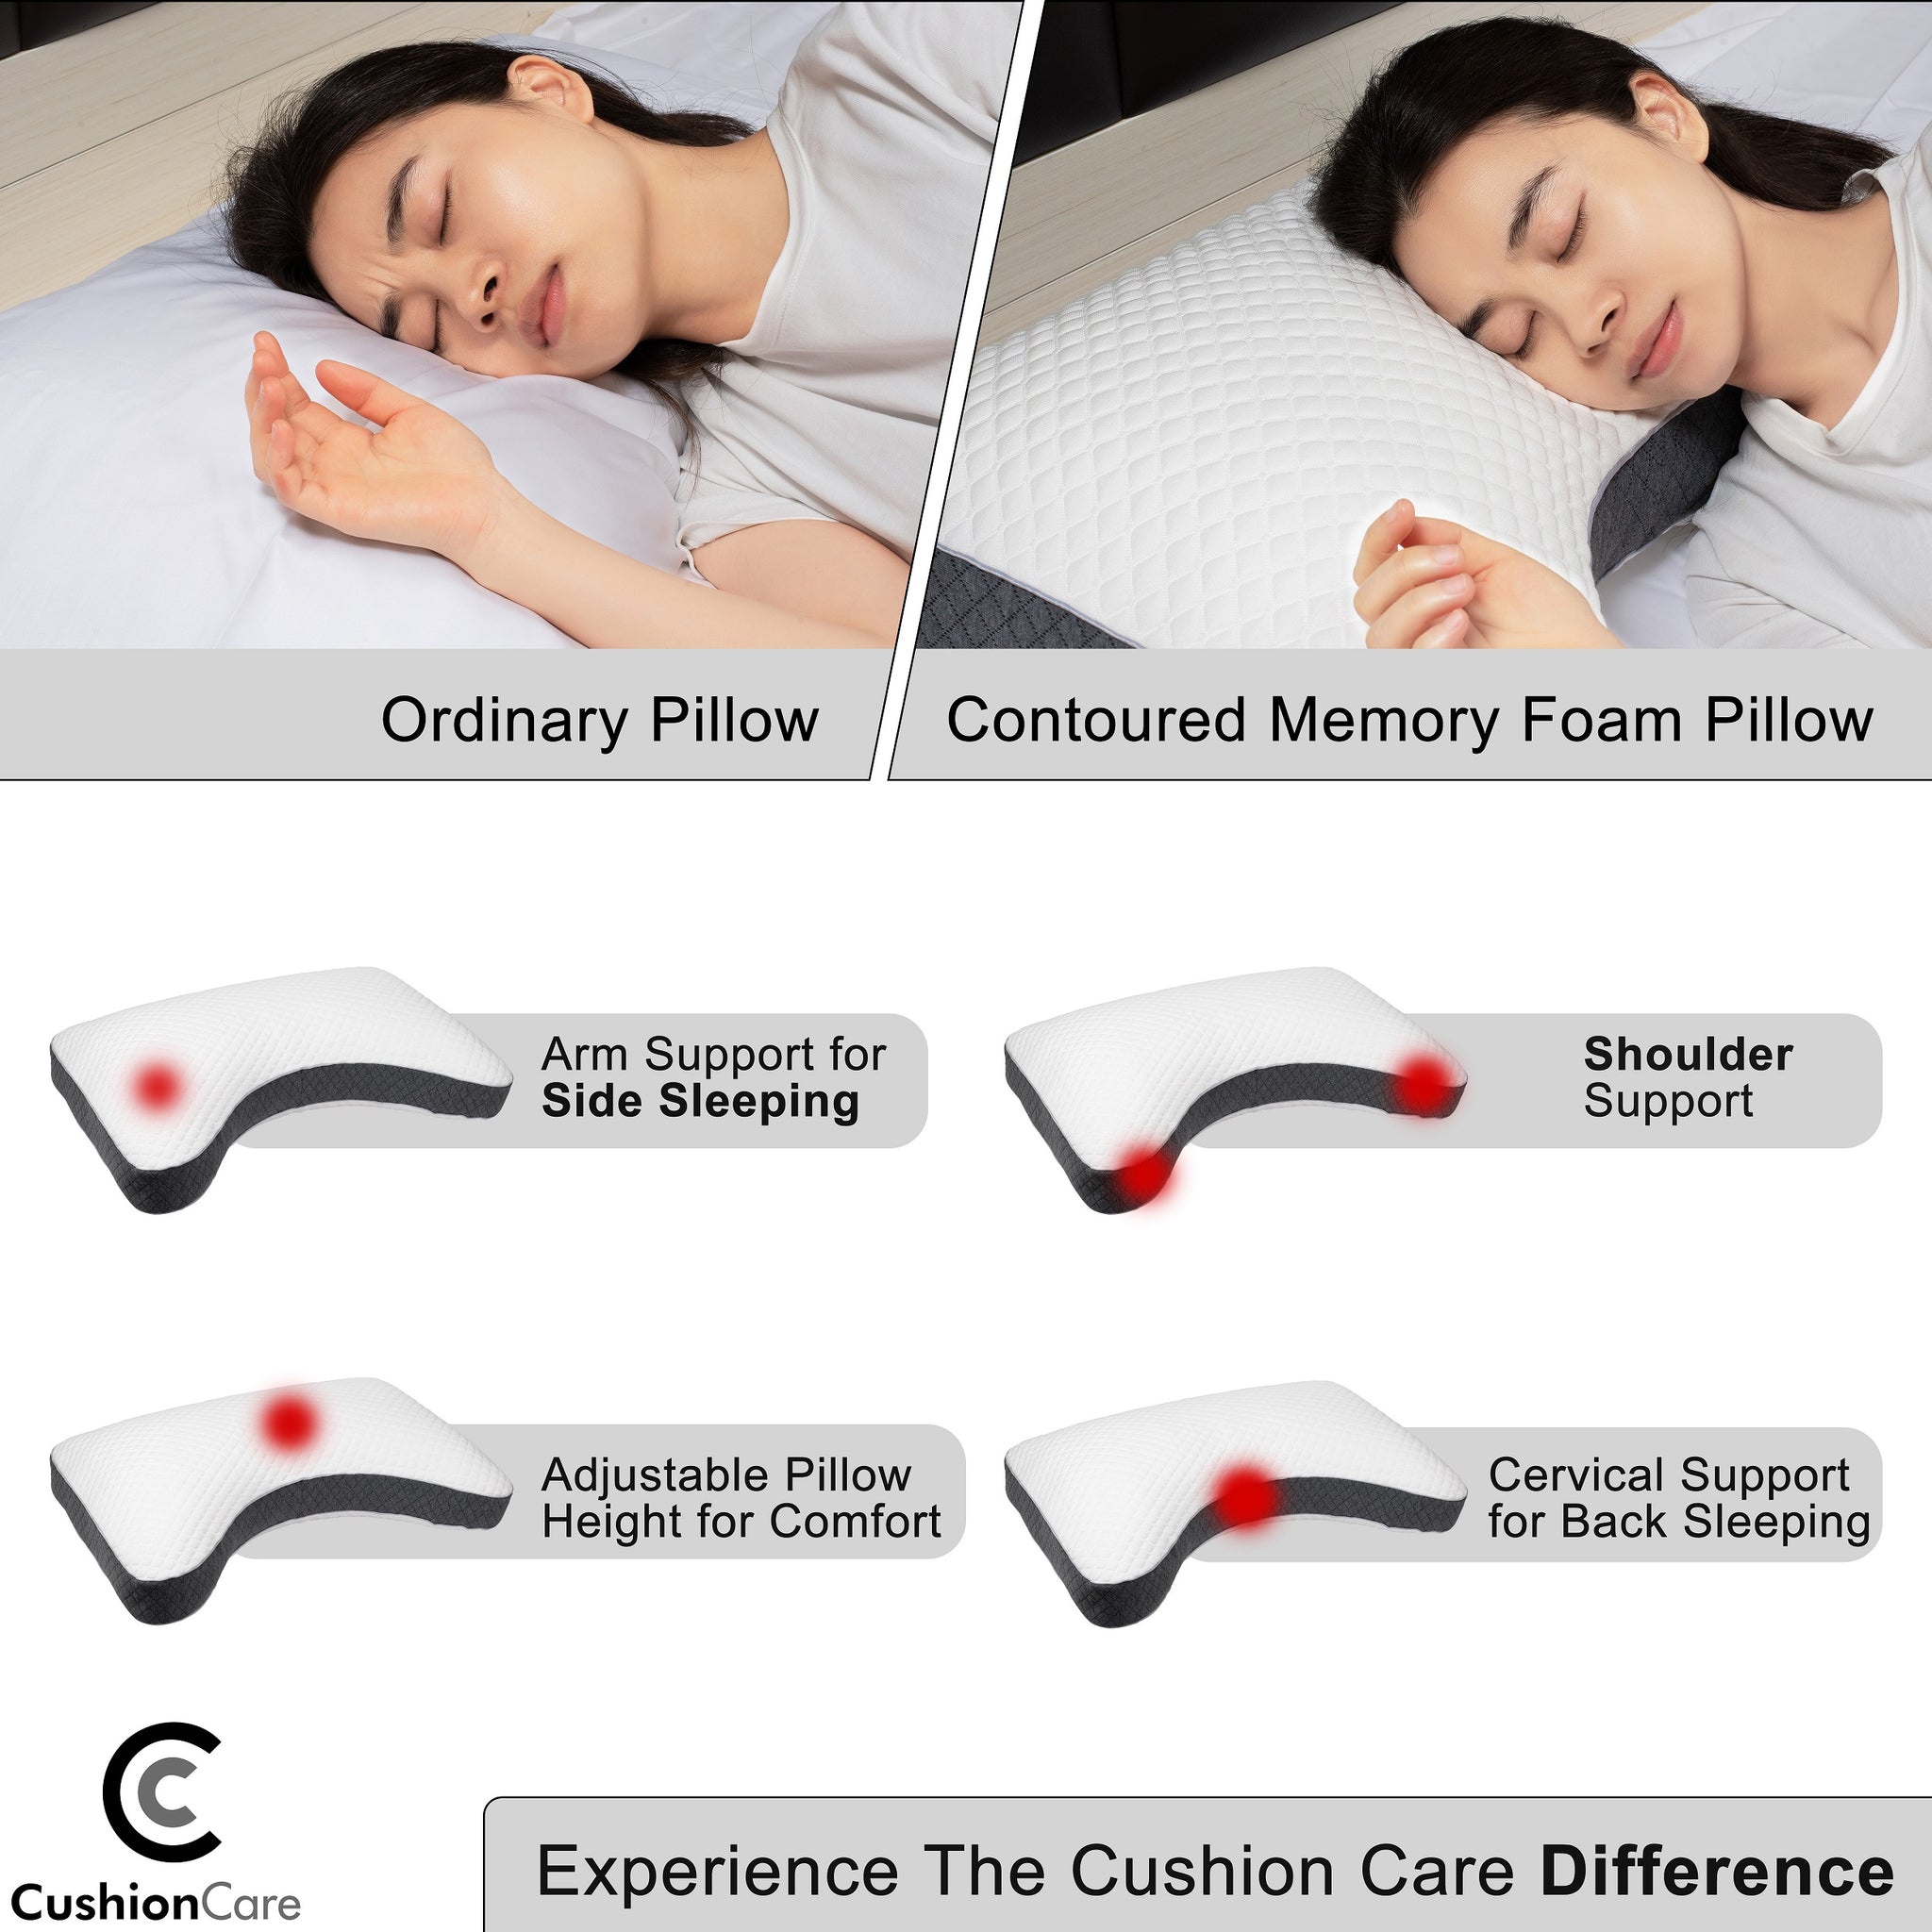 Back Pain Relief Support Pillow with Heat and Ice by Cureve